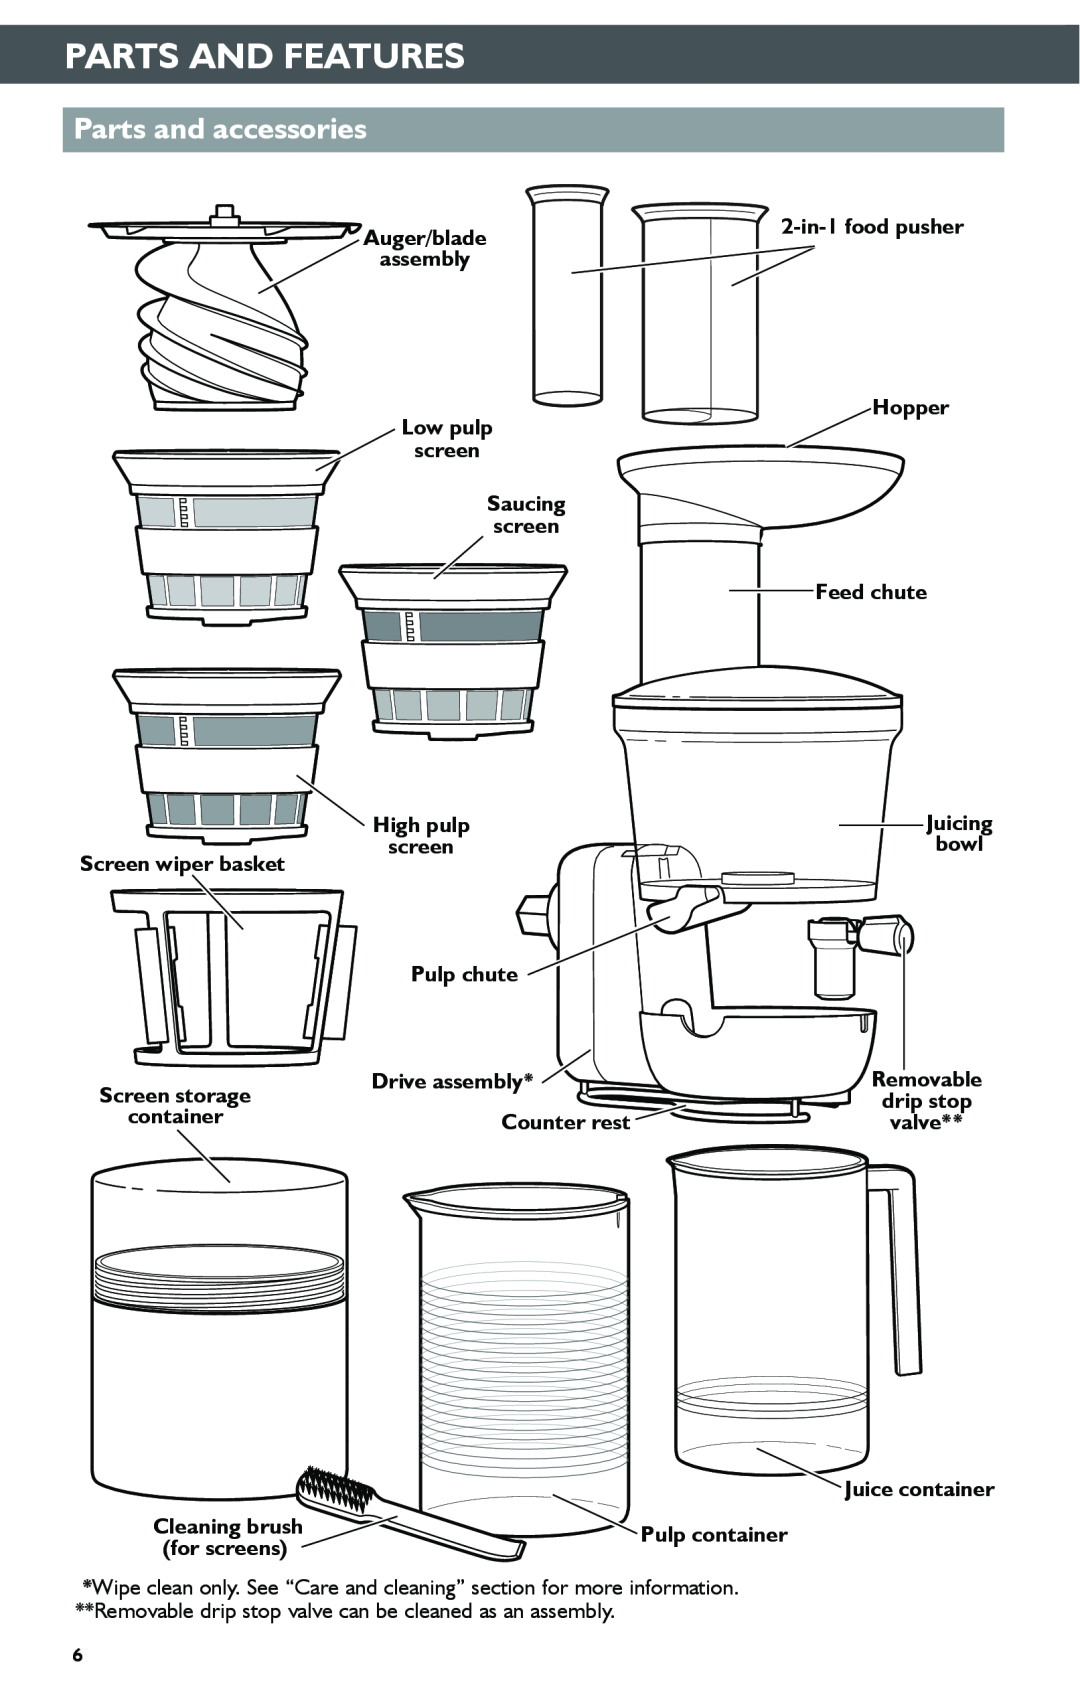 KitchenAid KSN1JA manual Parts And Features, Parts and accessories 